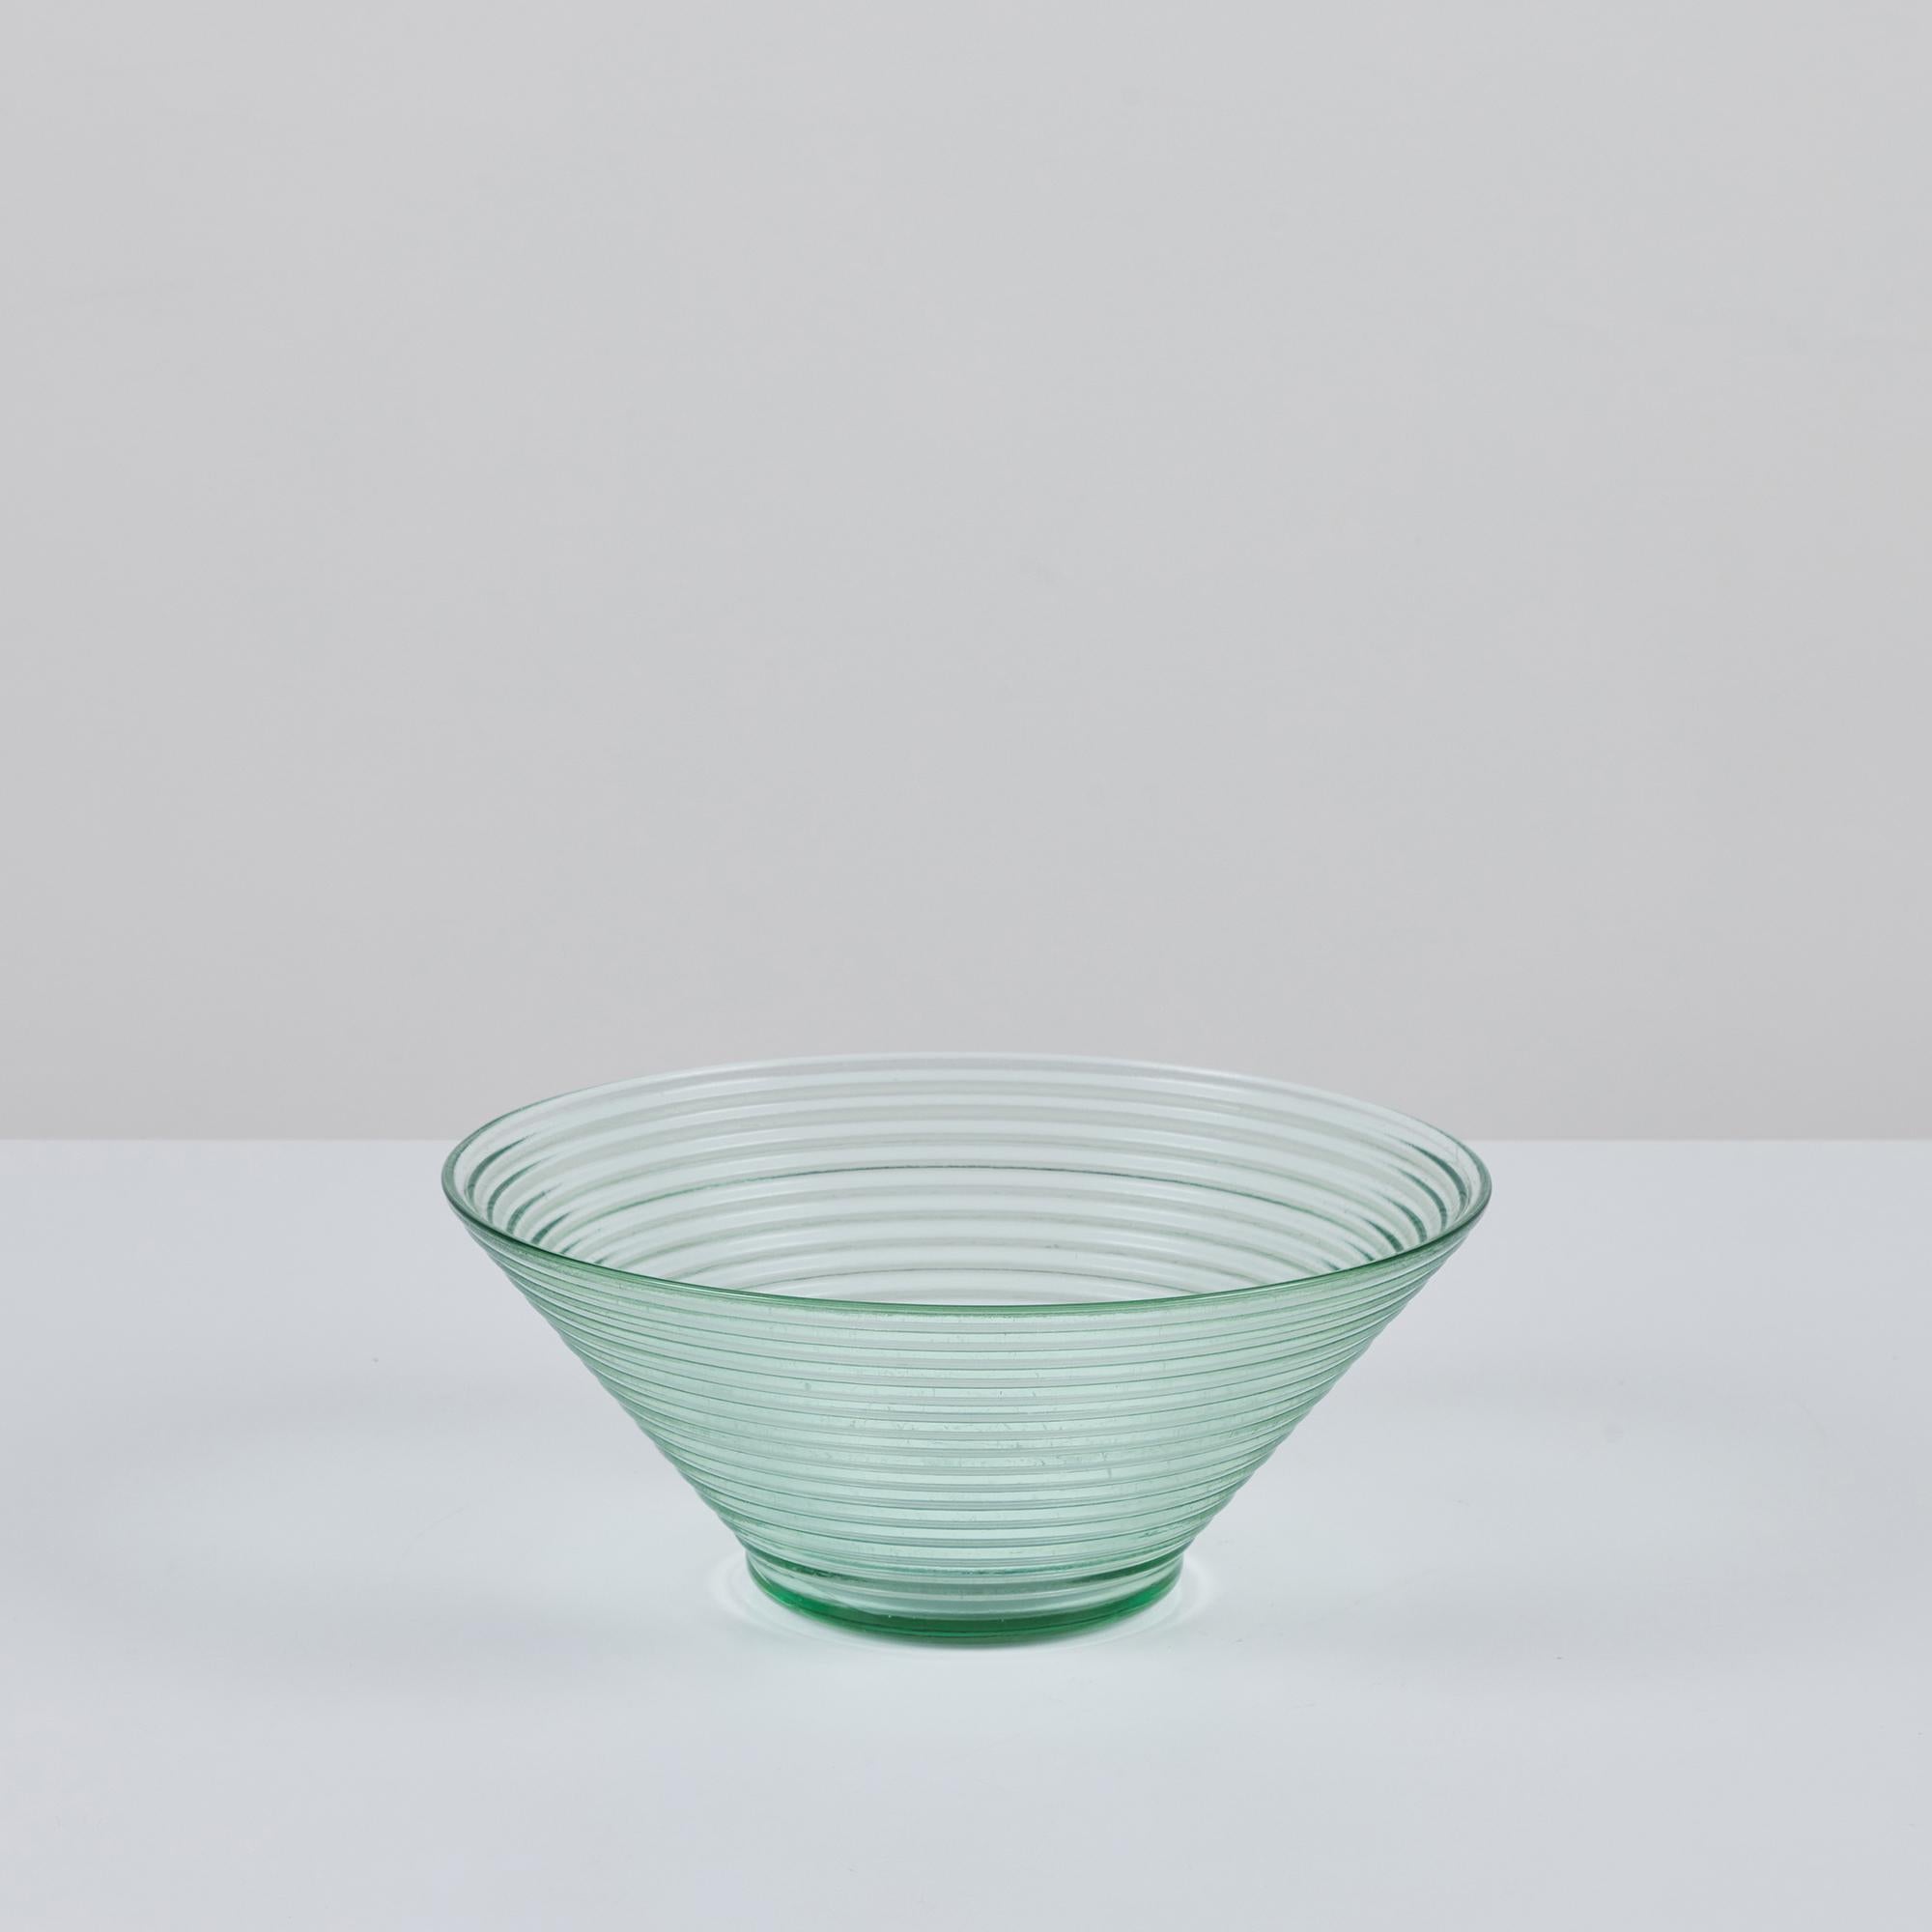 From Aino Aalto’s 1930s collection of glass pieces for Iittala of Finland. This design is made of pressed glass inspired by ripples of water with a slight greenish tint. Originally known as the Bölgeblick design, the bowl was made to easily stack